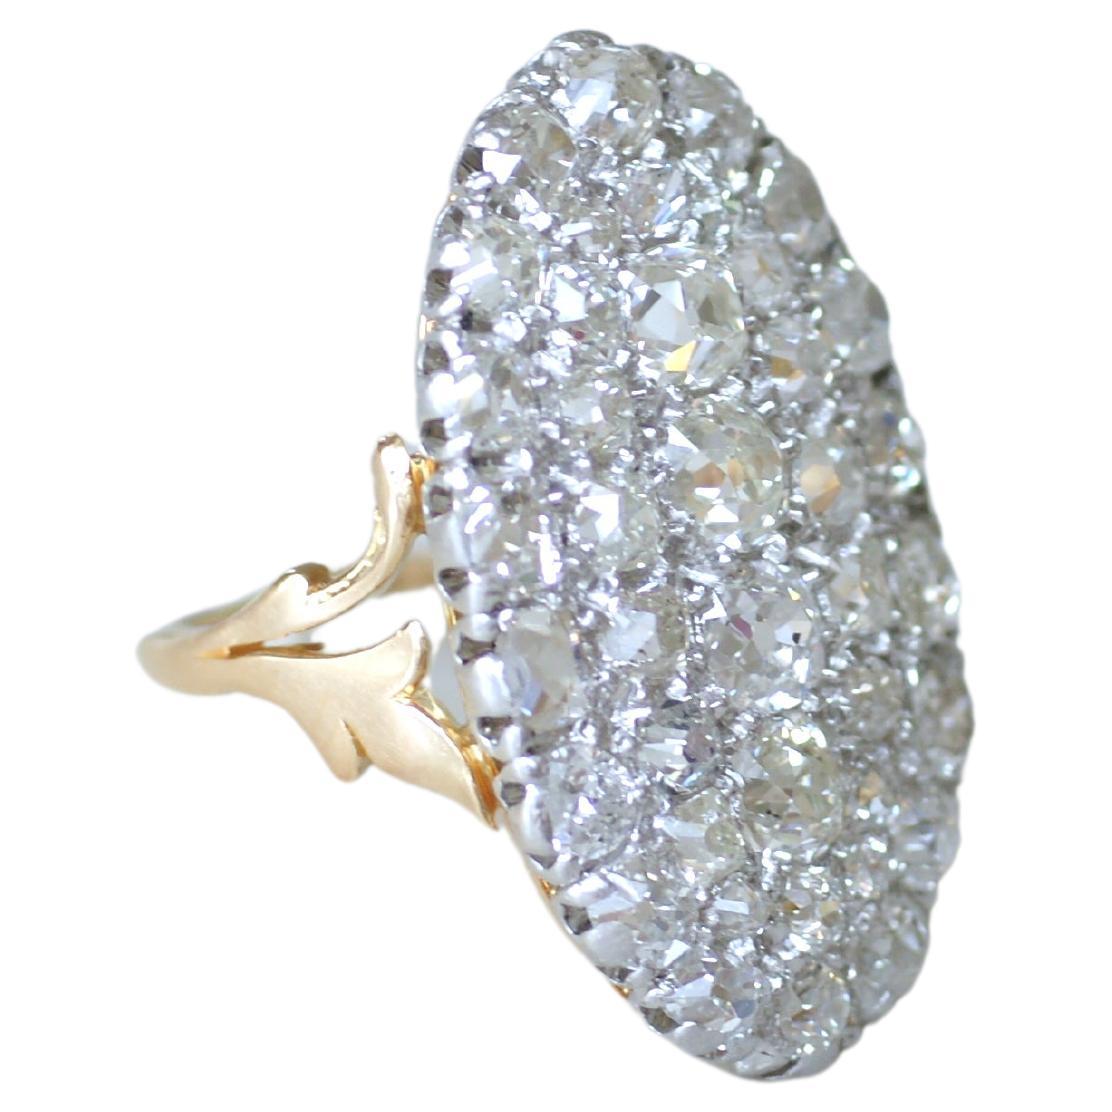 Edwardian 4.75cts Diamonds Navette Ring on Gold and Platinum